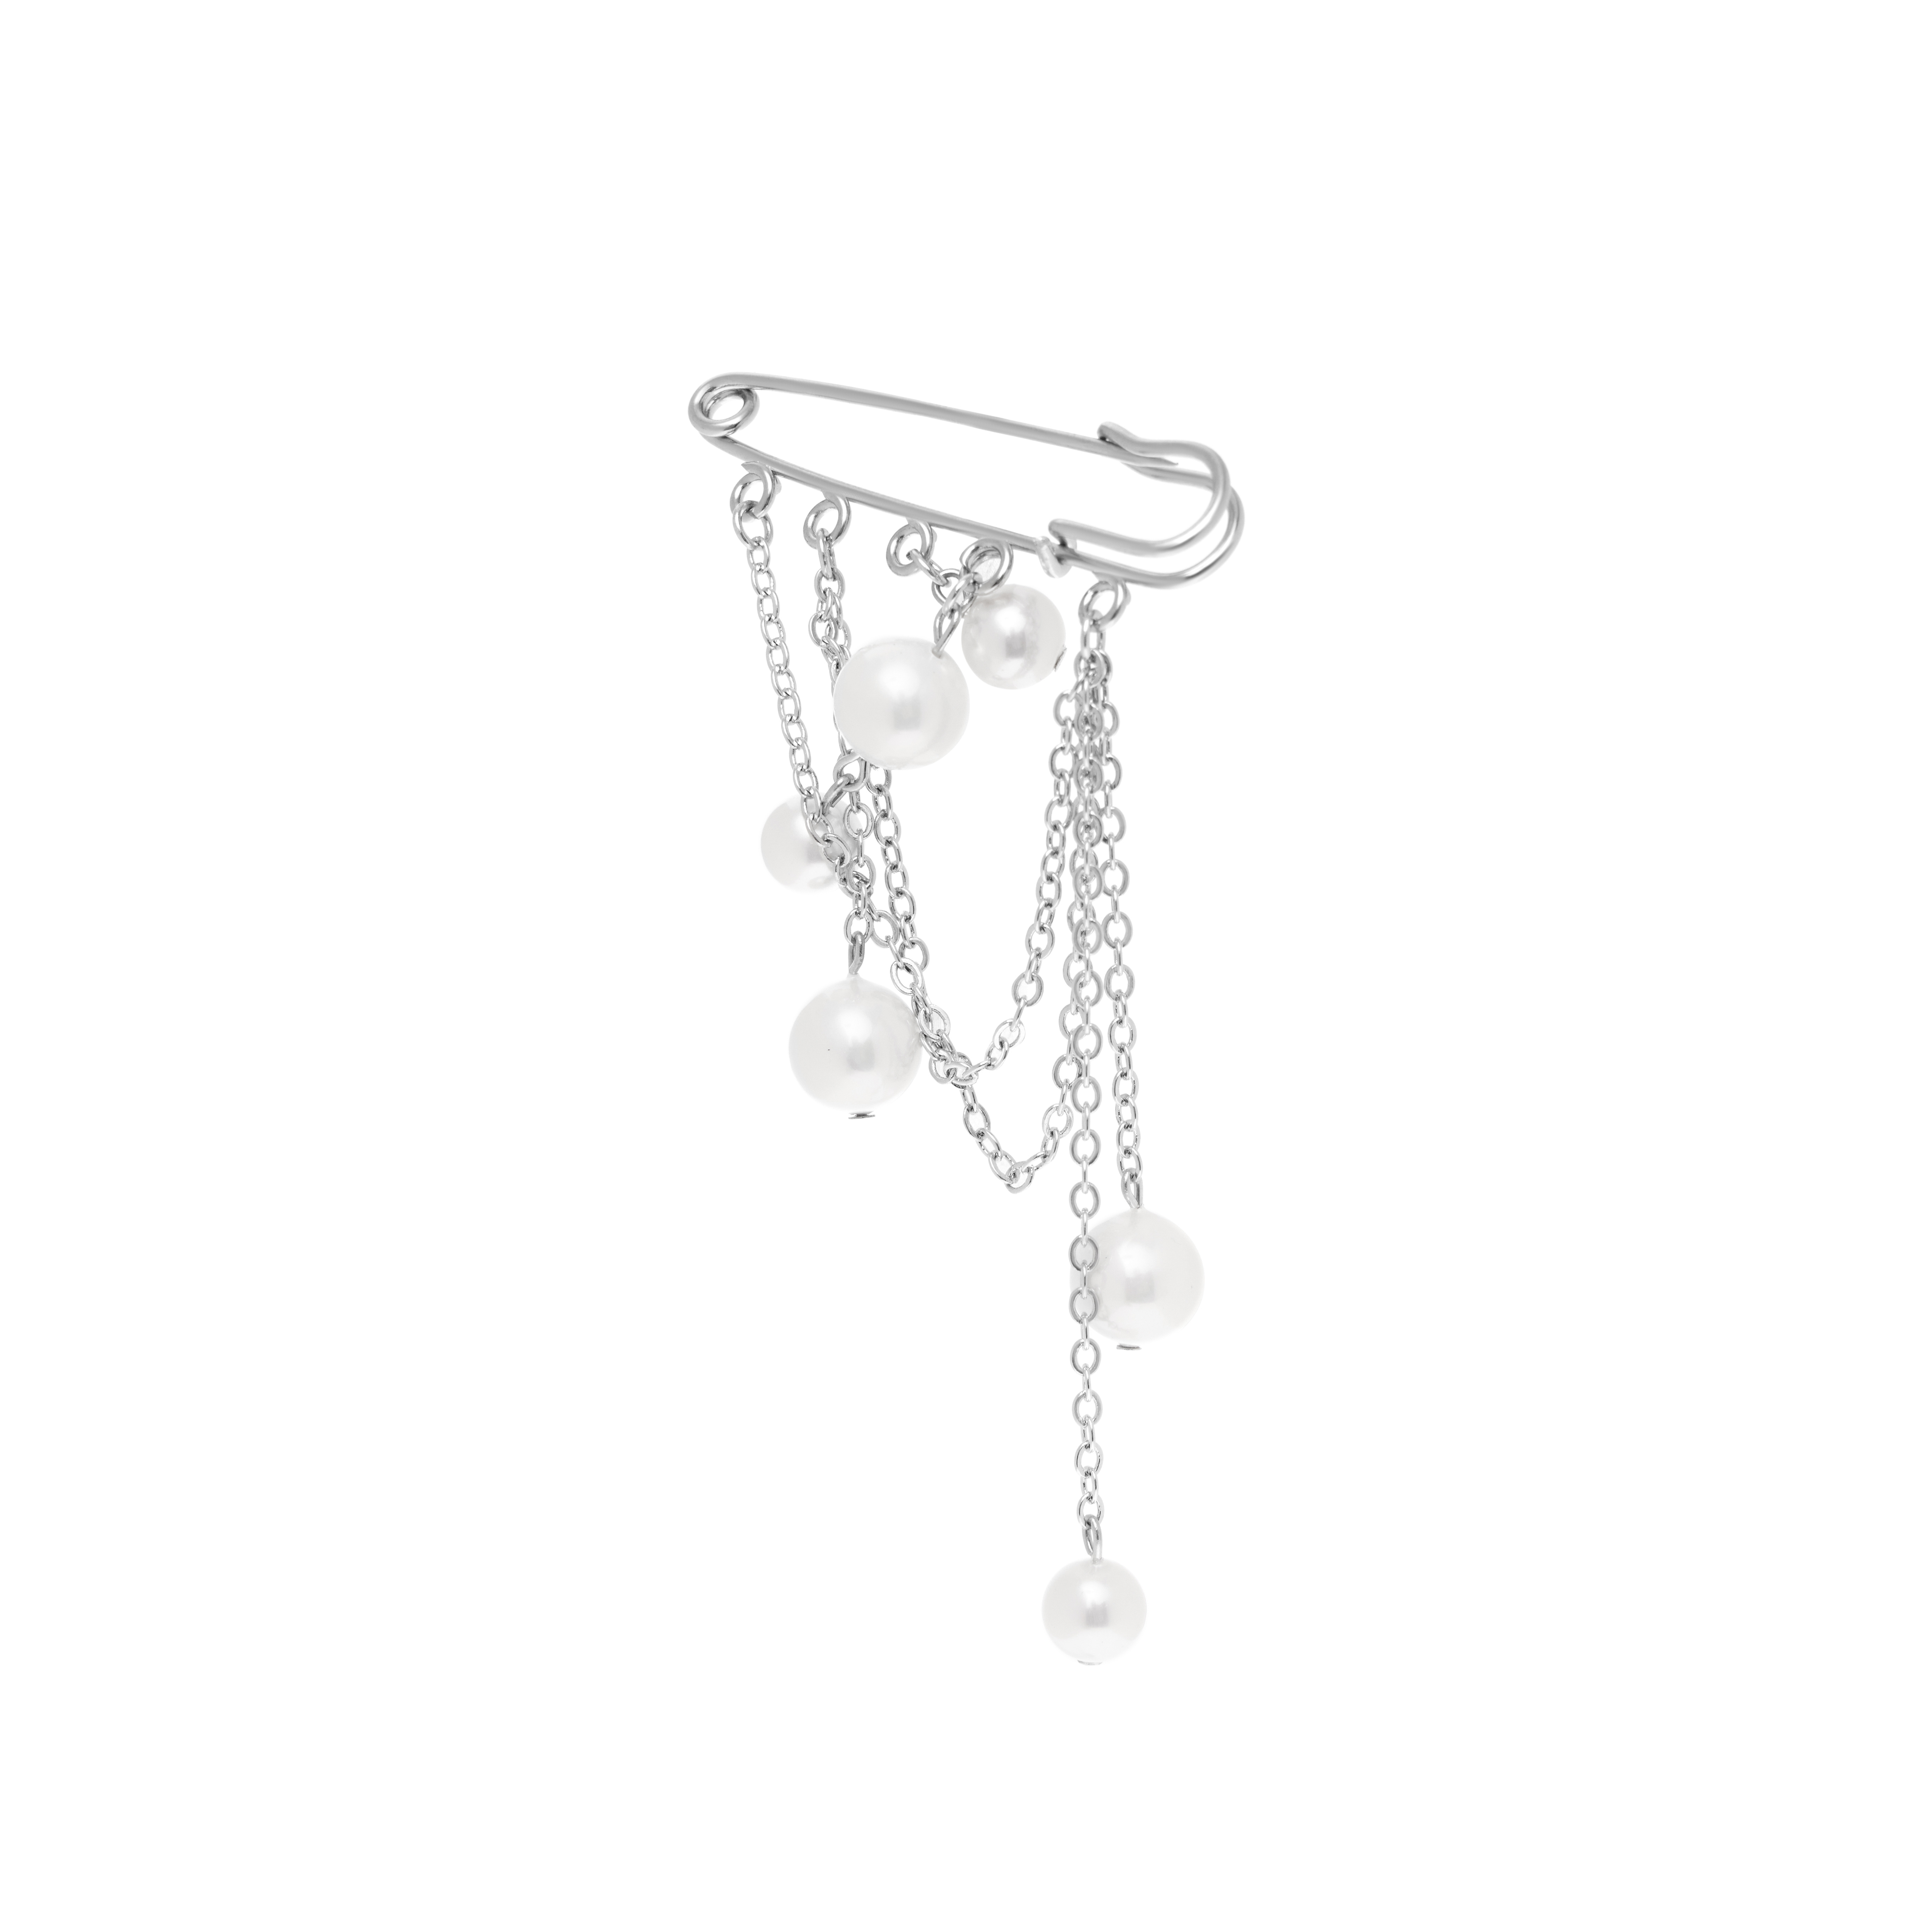 HOLLY JUNE Брошь Pearly Pin Brooch holly june серьга pearly mess earring